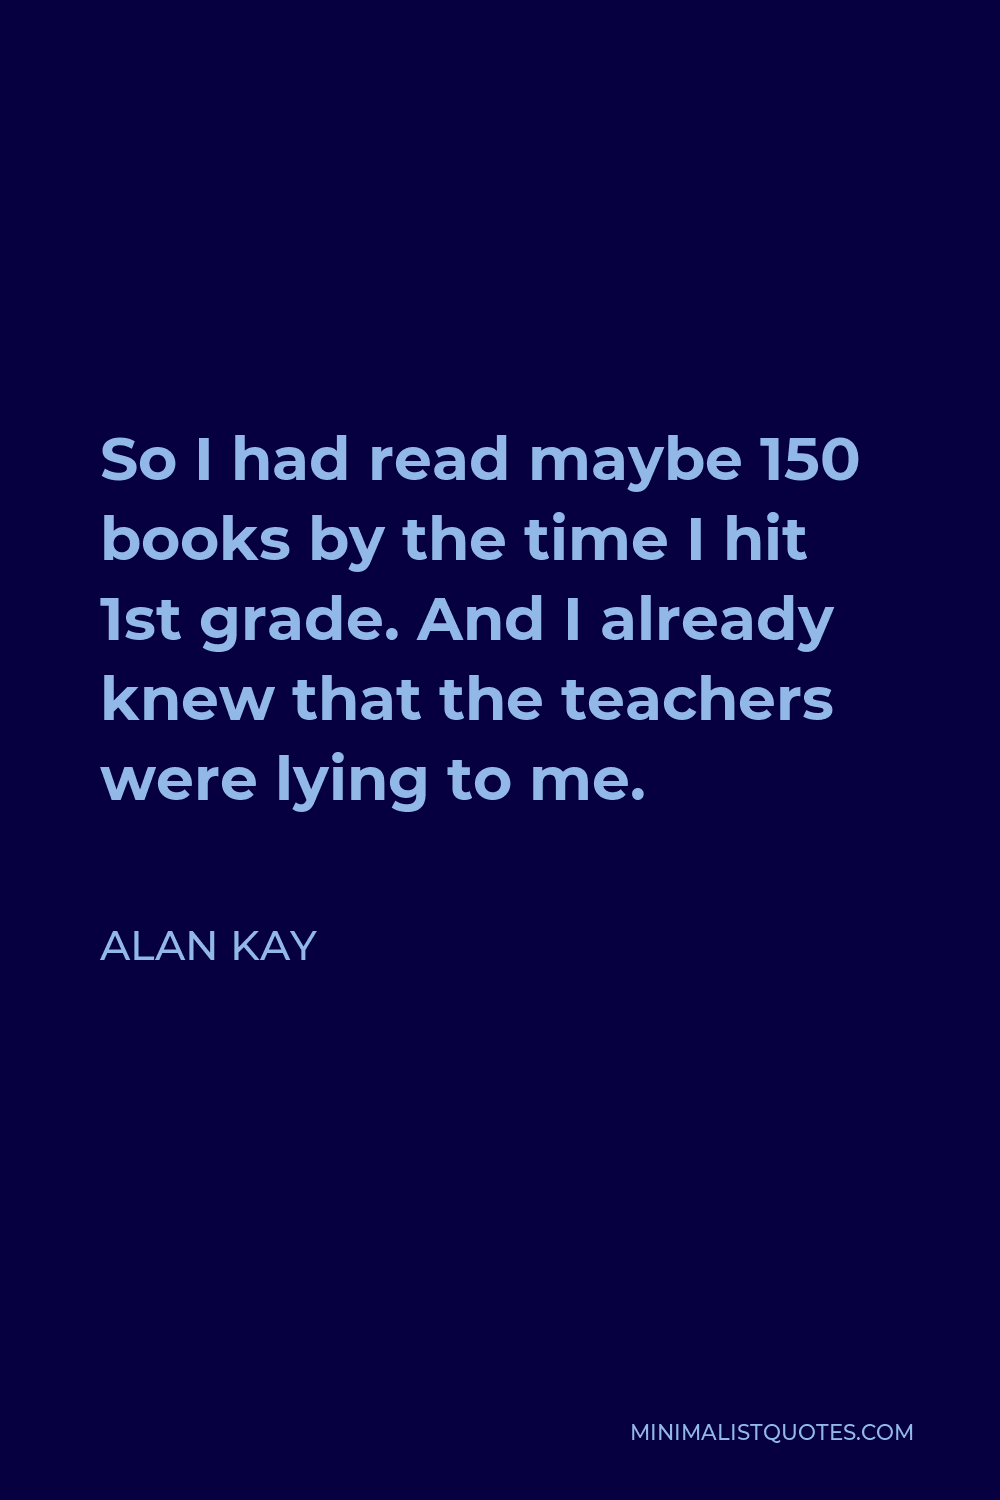 Alan Kay Quote - So I had read maybe 150 books by the time I hit 1st grade. And I already knew that the teachers were lying to me.